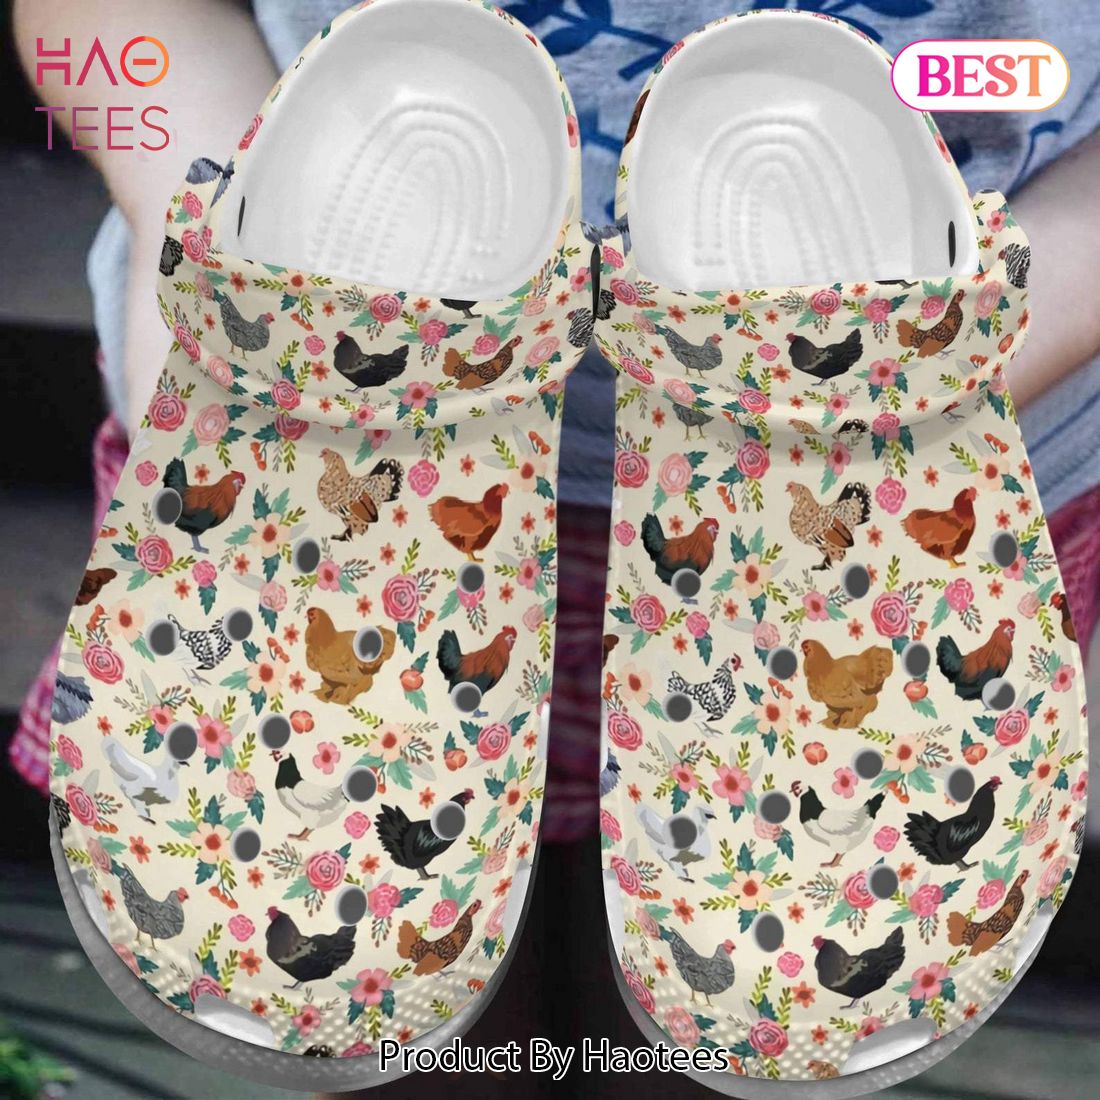 https://images.haotees.com/wp-content/uploads/2023/05/16161533/chicken-flower-shoes-chicken-farm-outdoor-shoes-birthday-gifts-for-women-mother-grandma-1-YRIMe.jpg